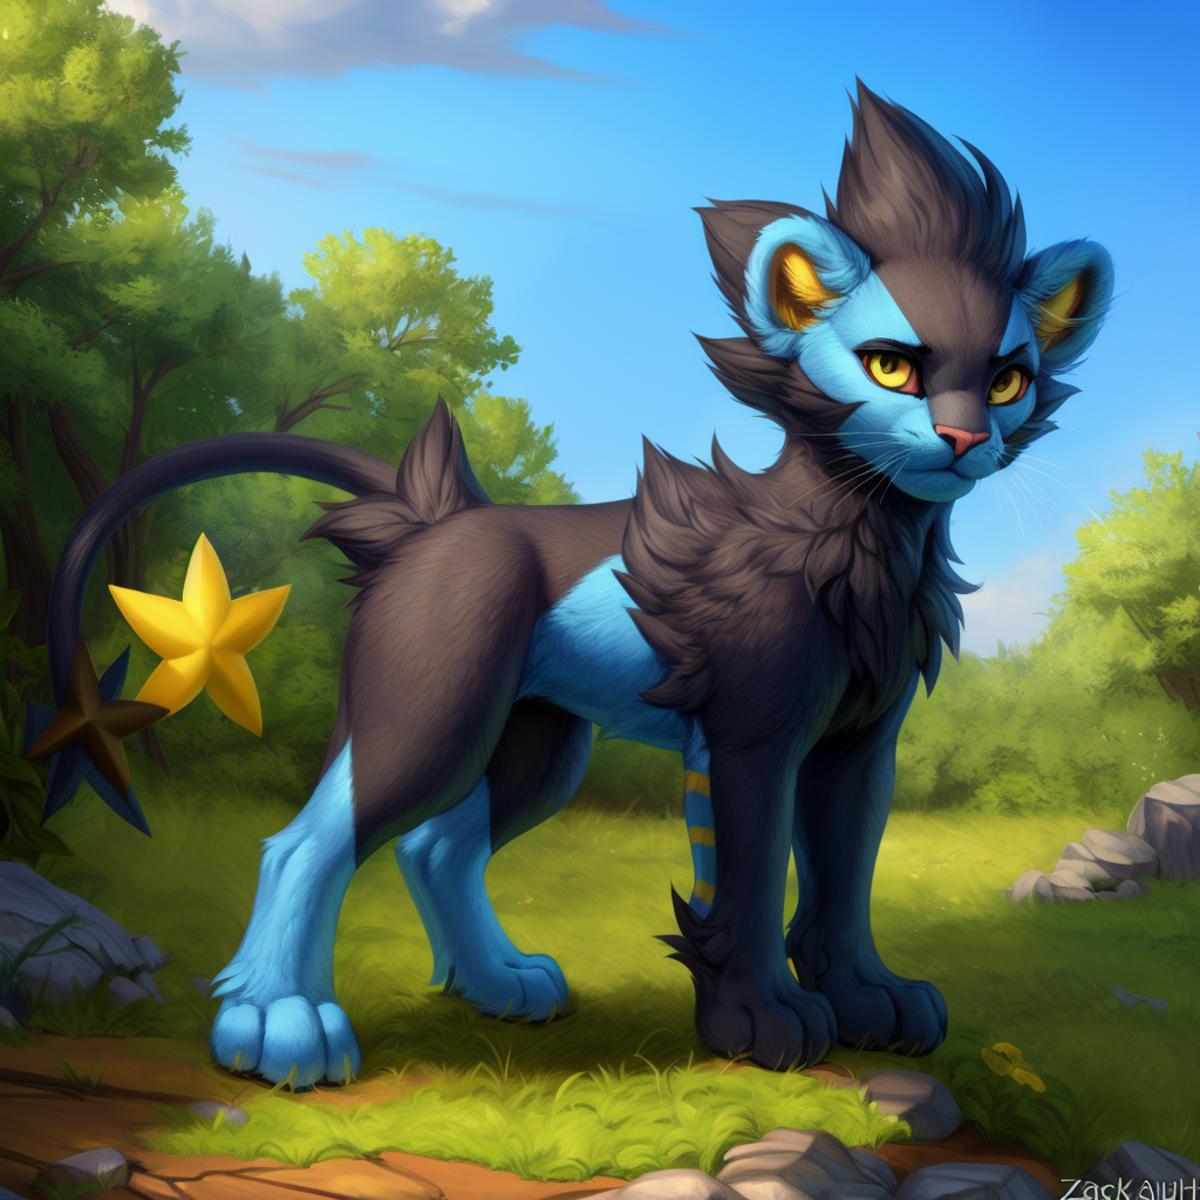 Luxray - Pokemon image by Orion_12